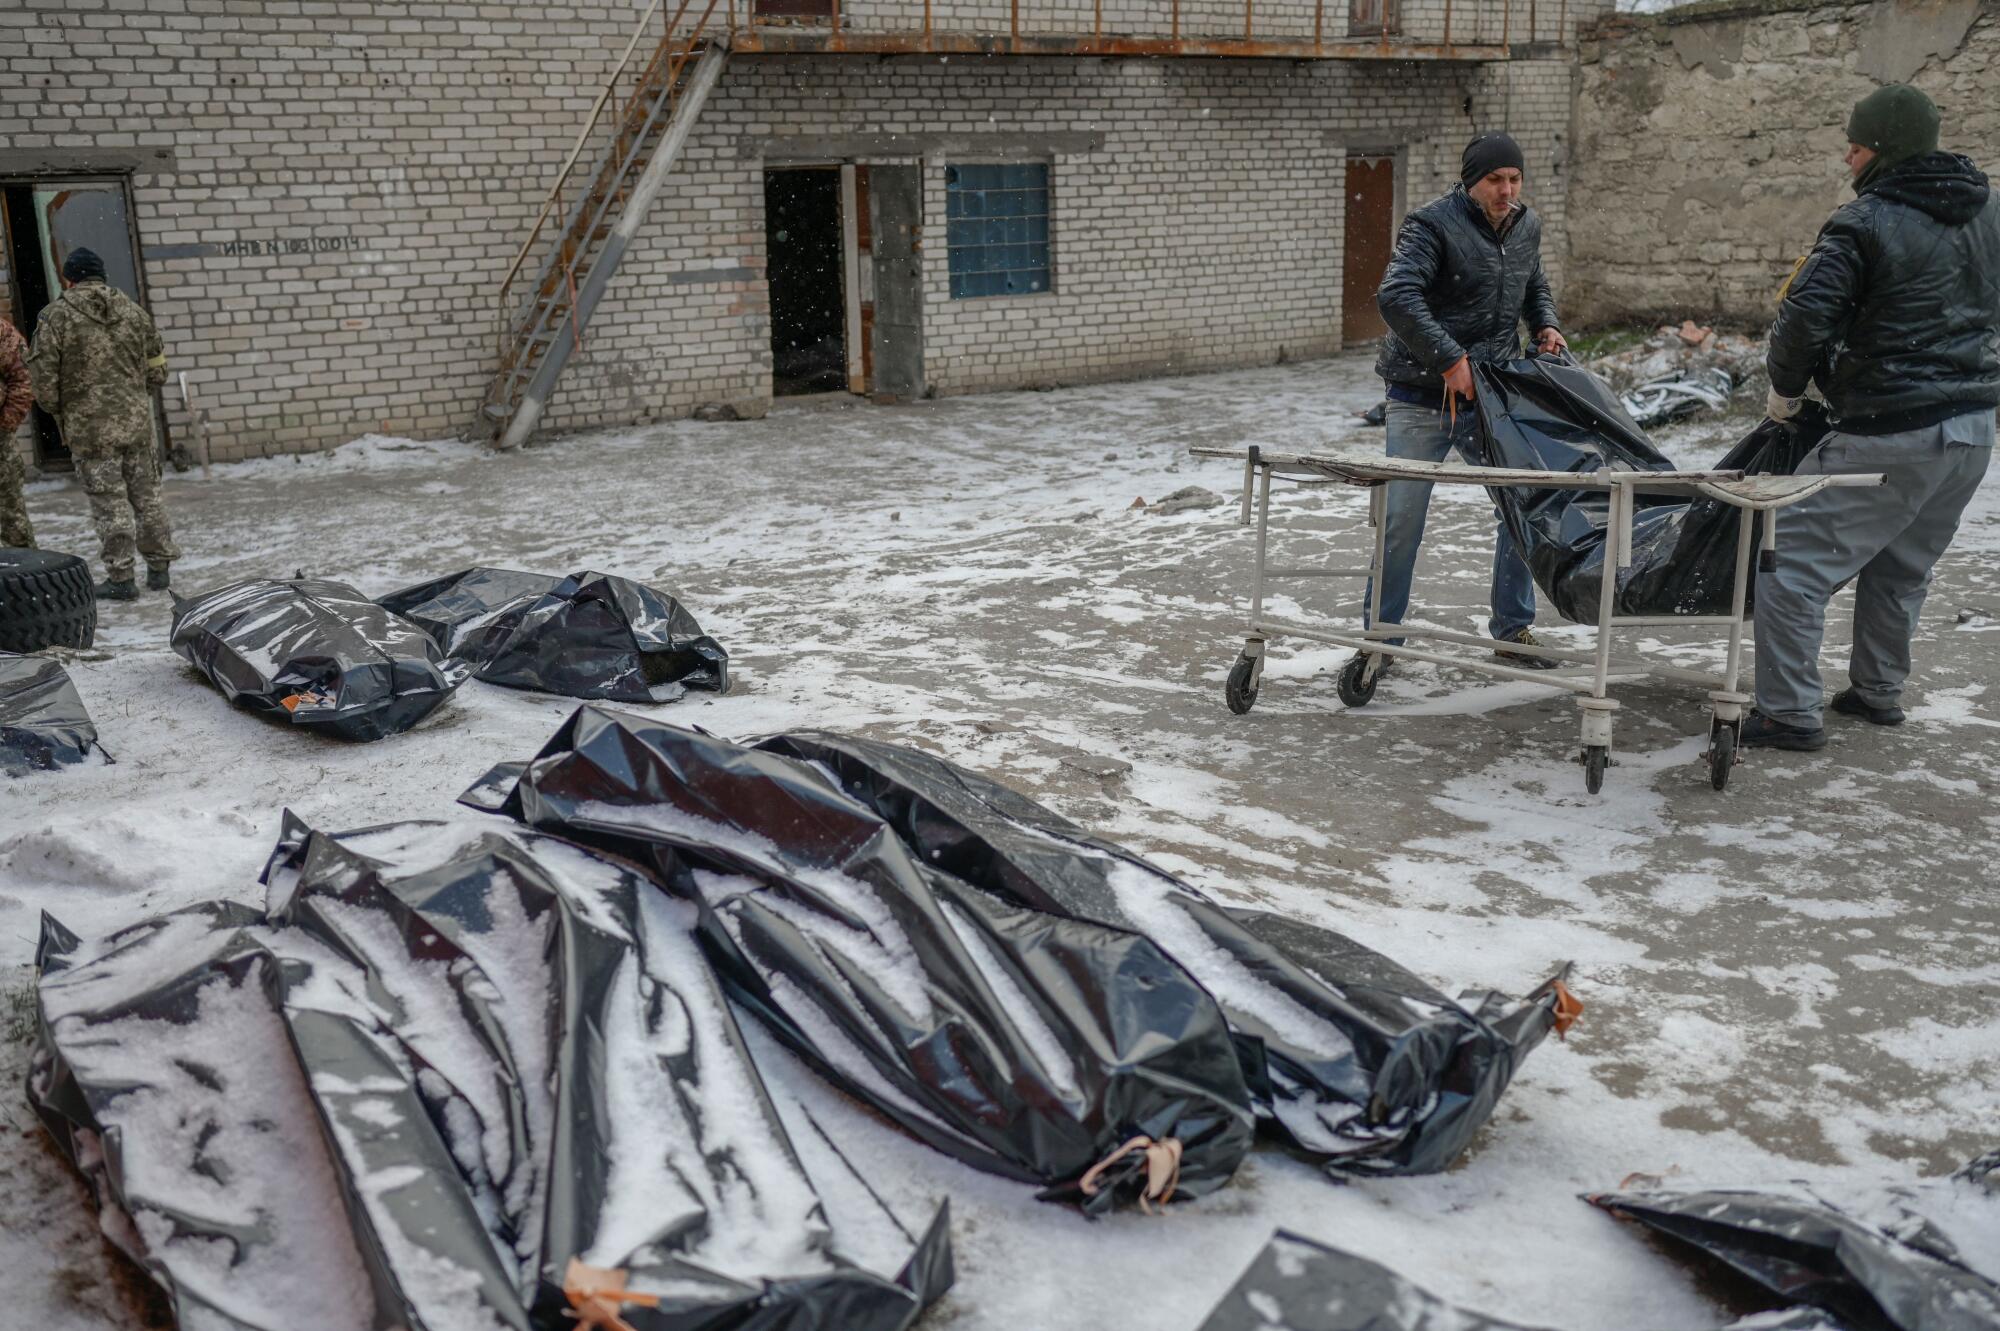 Two men carry a corpse in a body bag to lay it next to others in a snow covered yard in Mykolaiv.